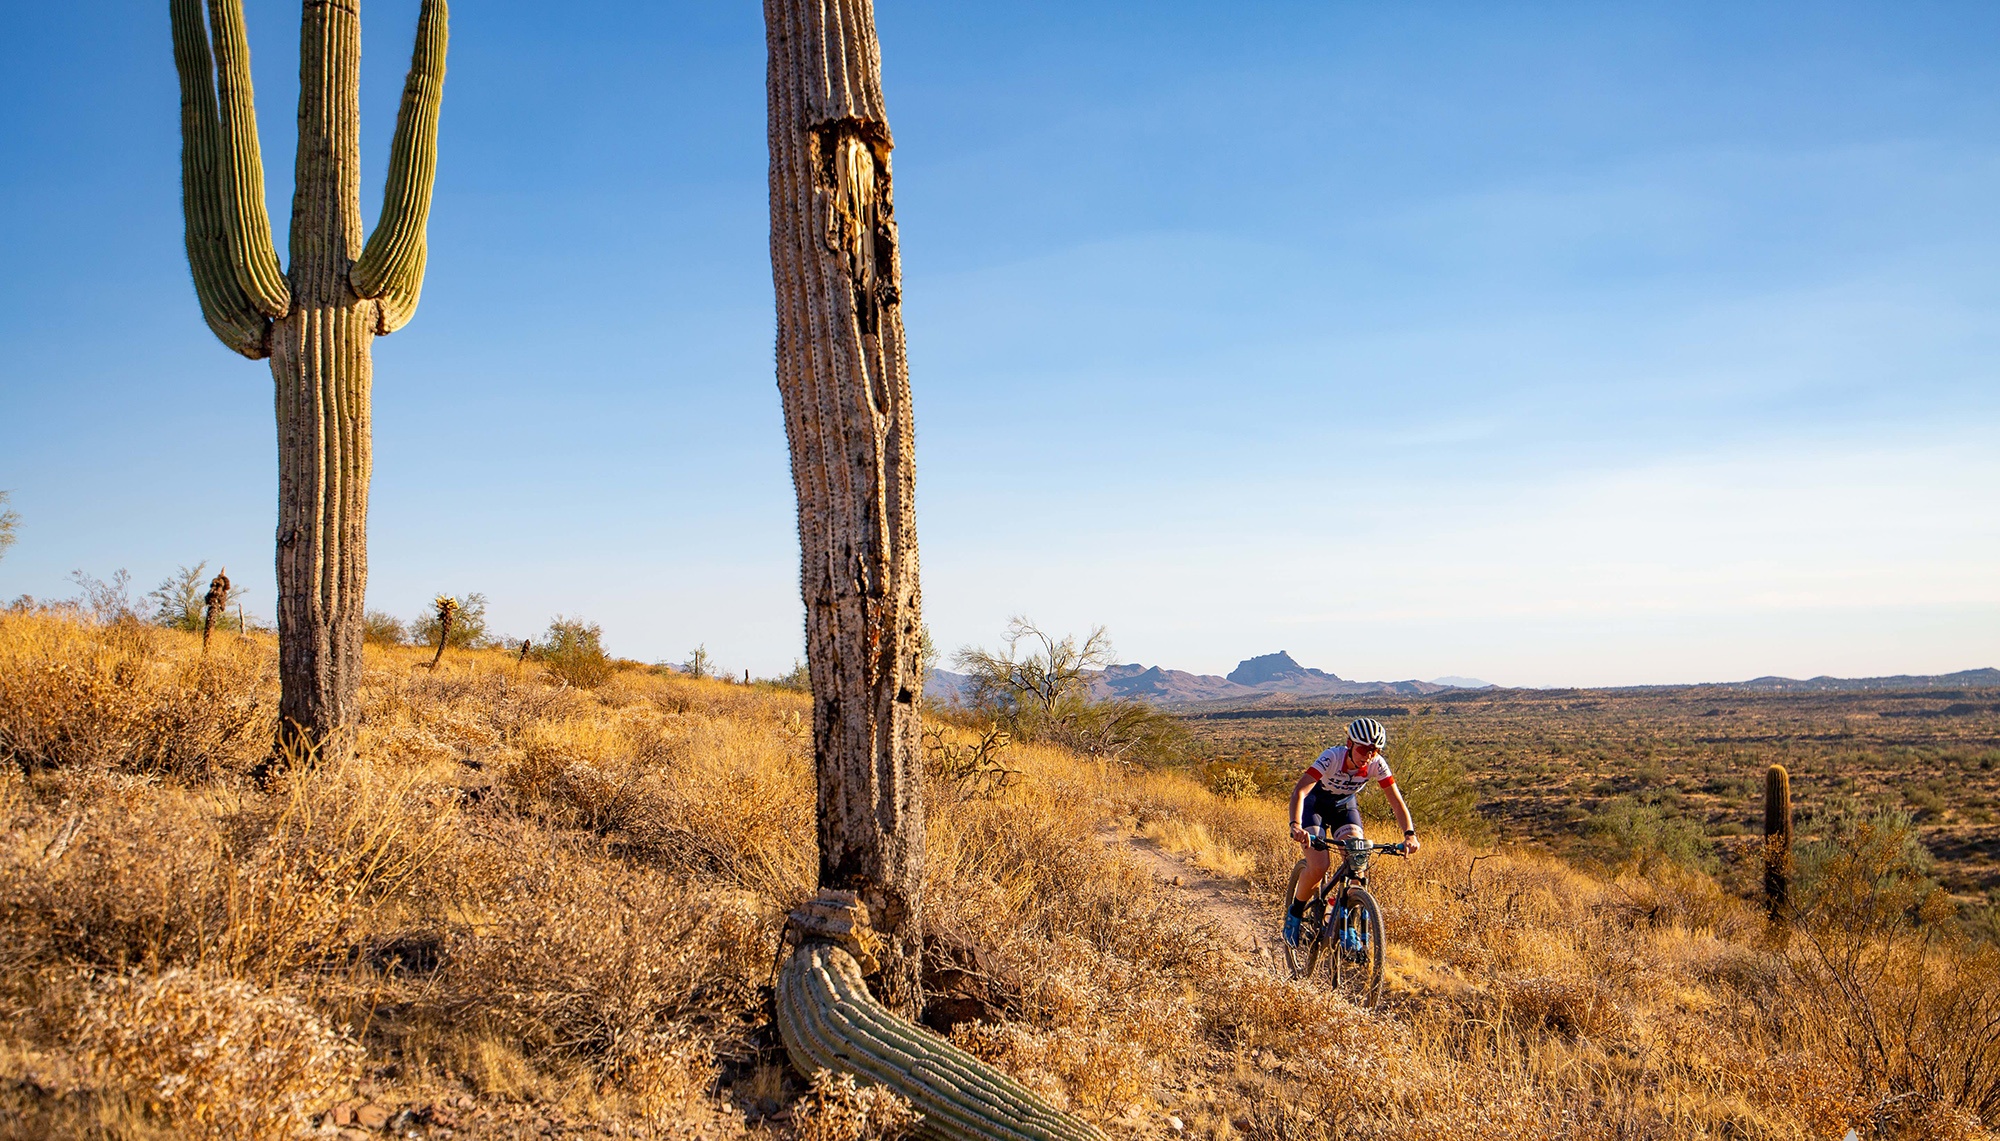 The Specialized Cactus Cup Kicks Off Mountain Bike Racing In 2022